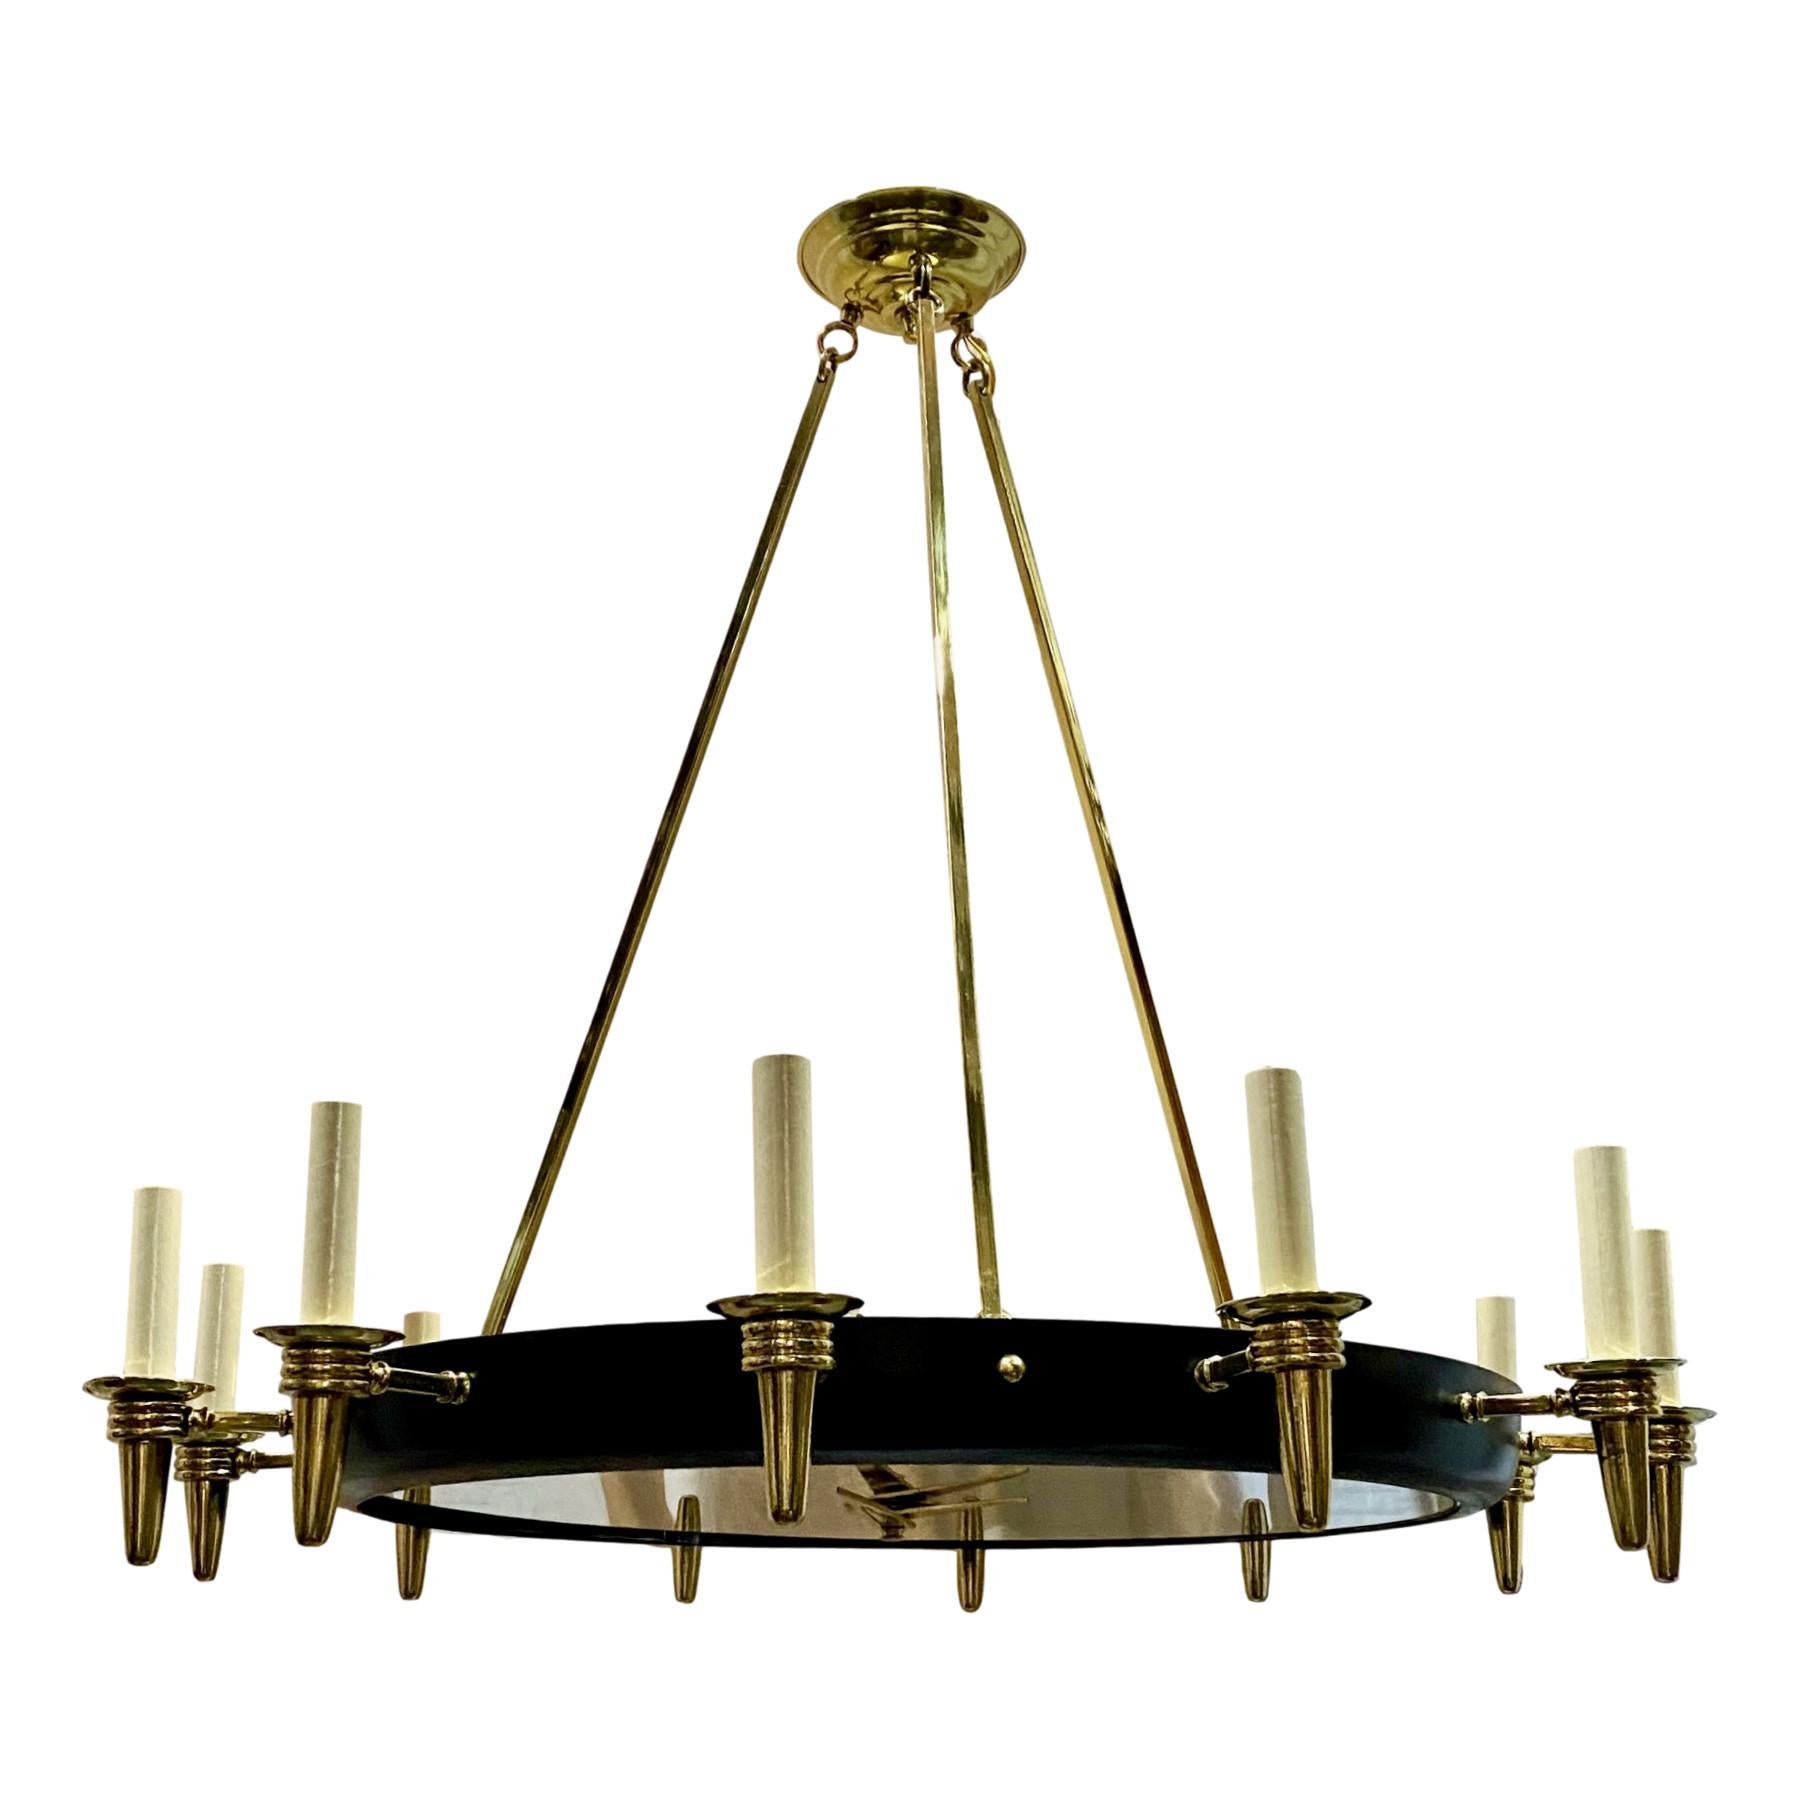 A circa 1960's French polished and painted bronze chandelier with a mirror inset depicting a clock with Roman numerals.
Measurements:
Current drop: 32